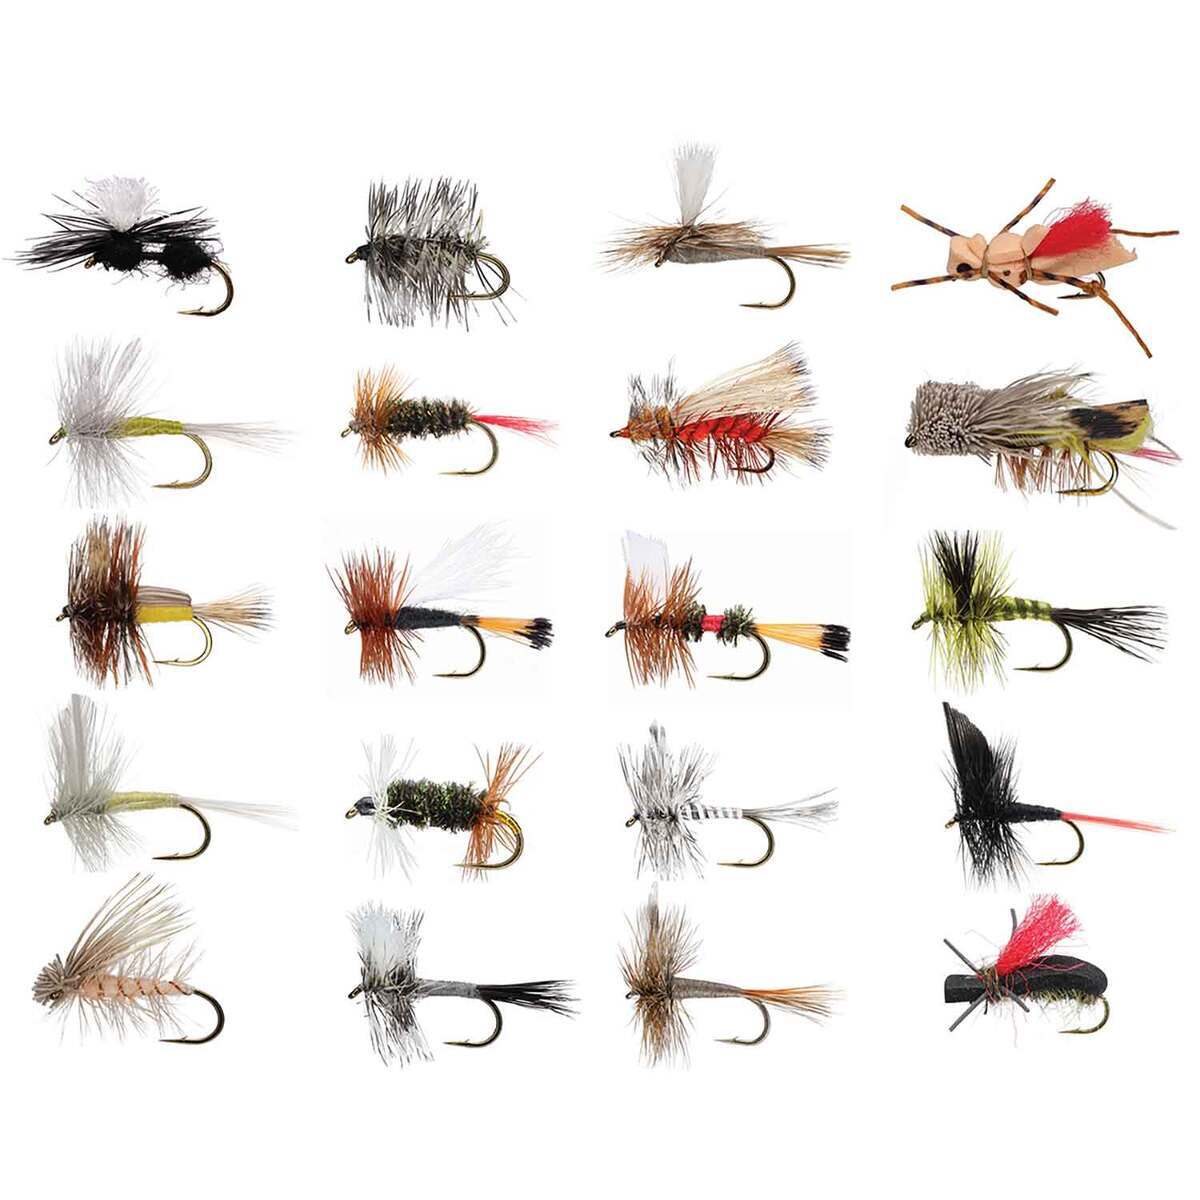 RoundRocks Top 20 Dry Flies Assortment by Sportsman's Warehouse